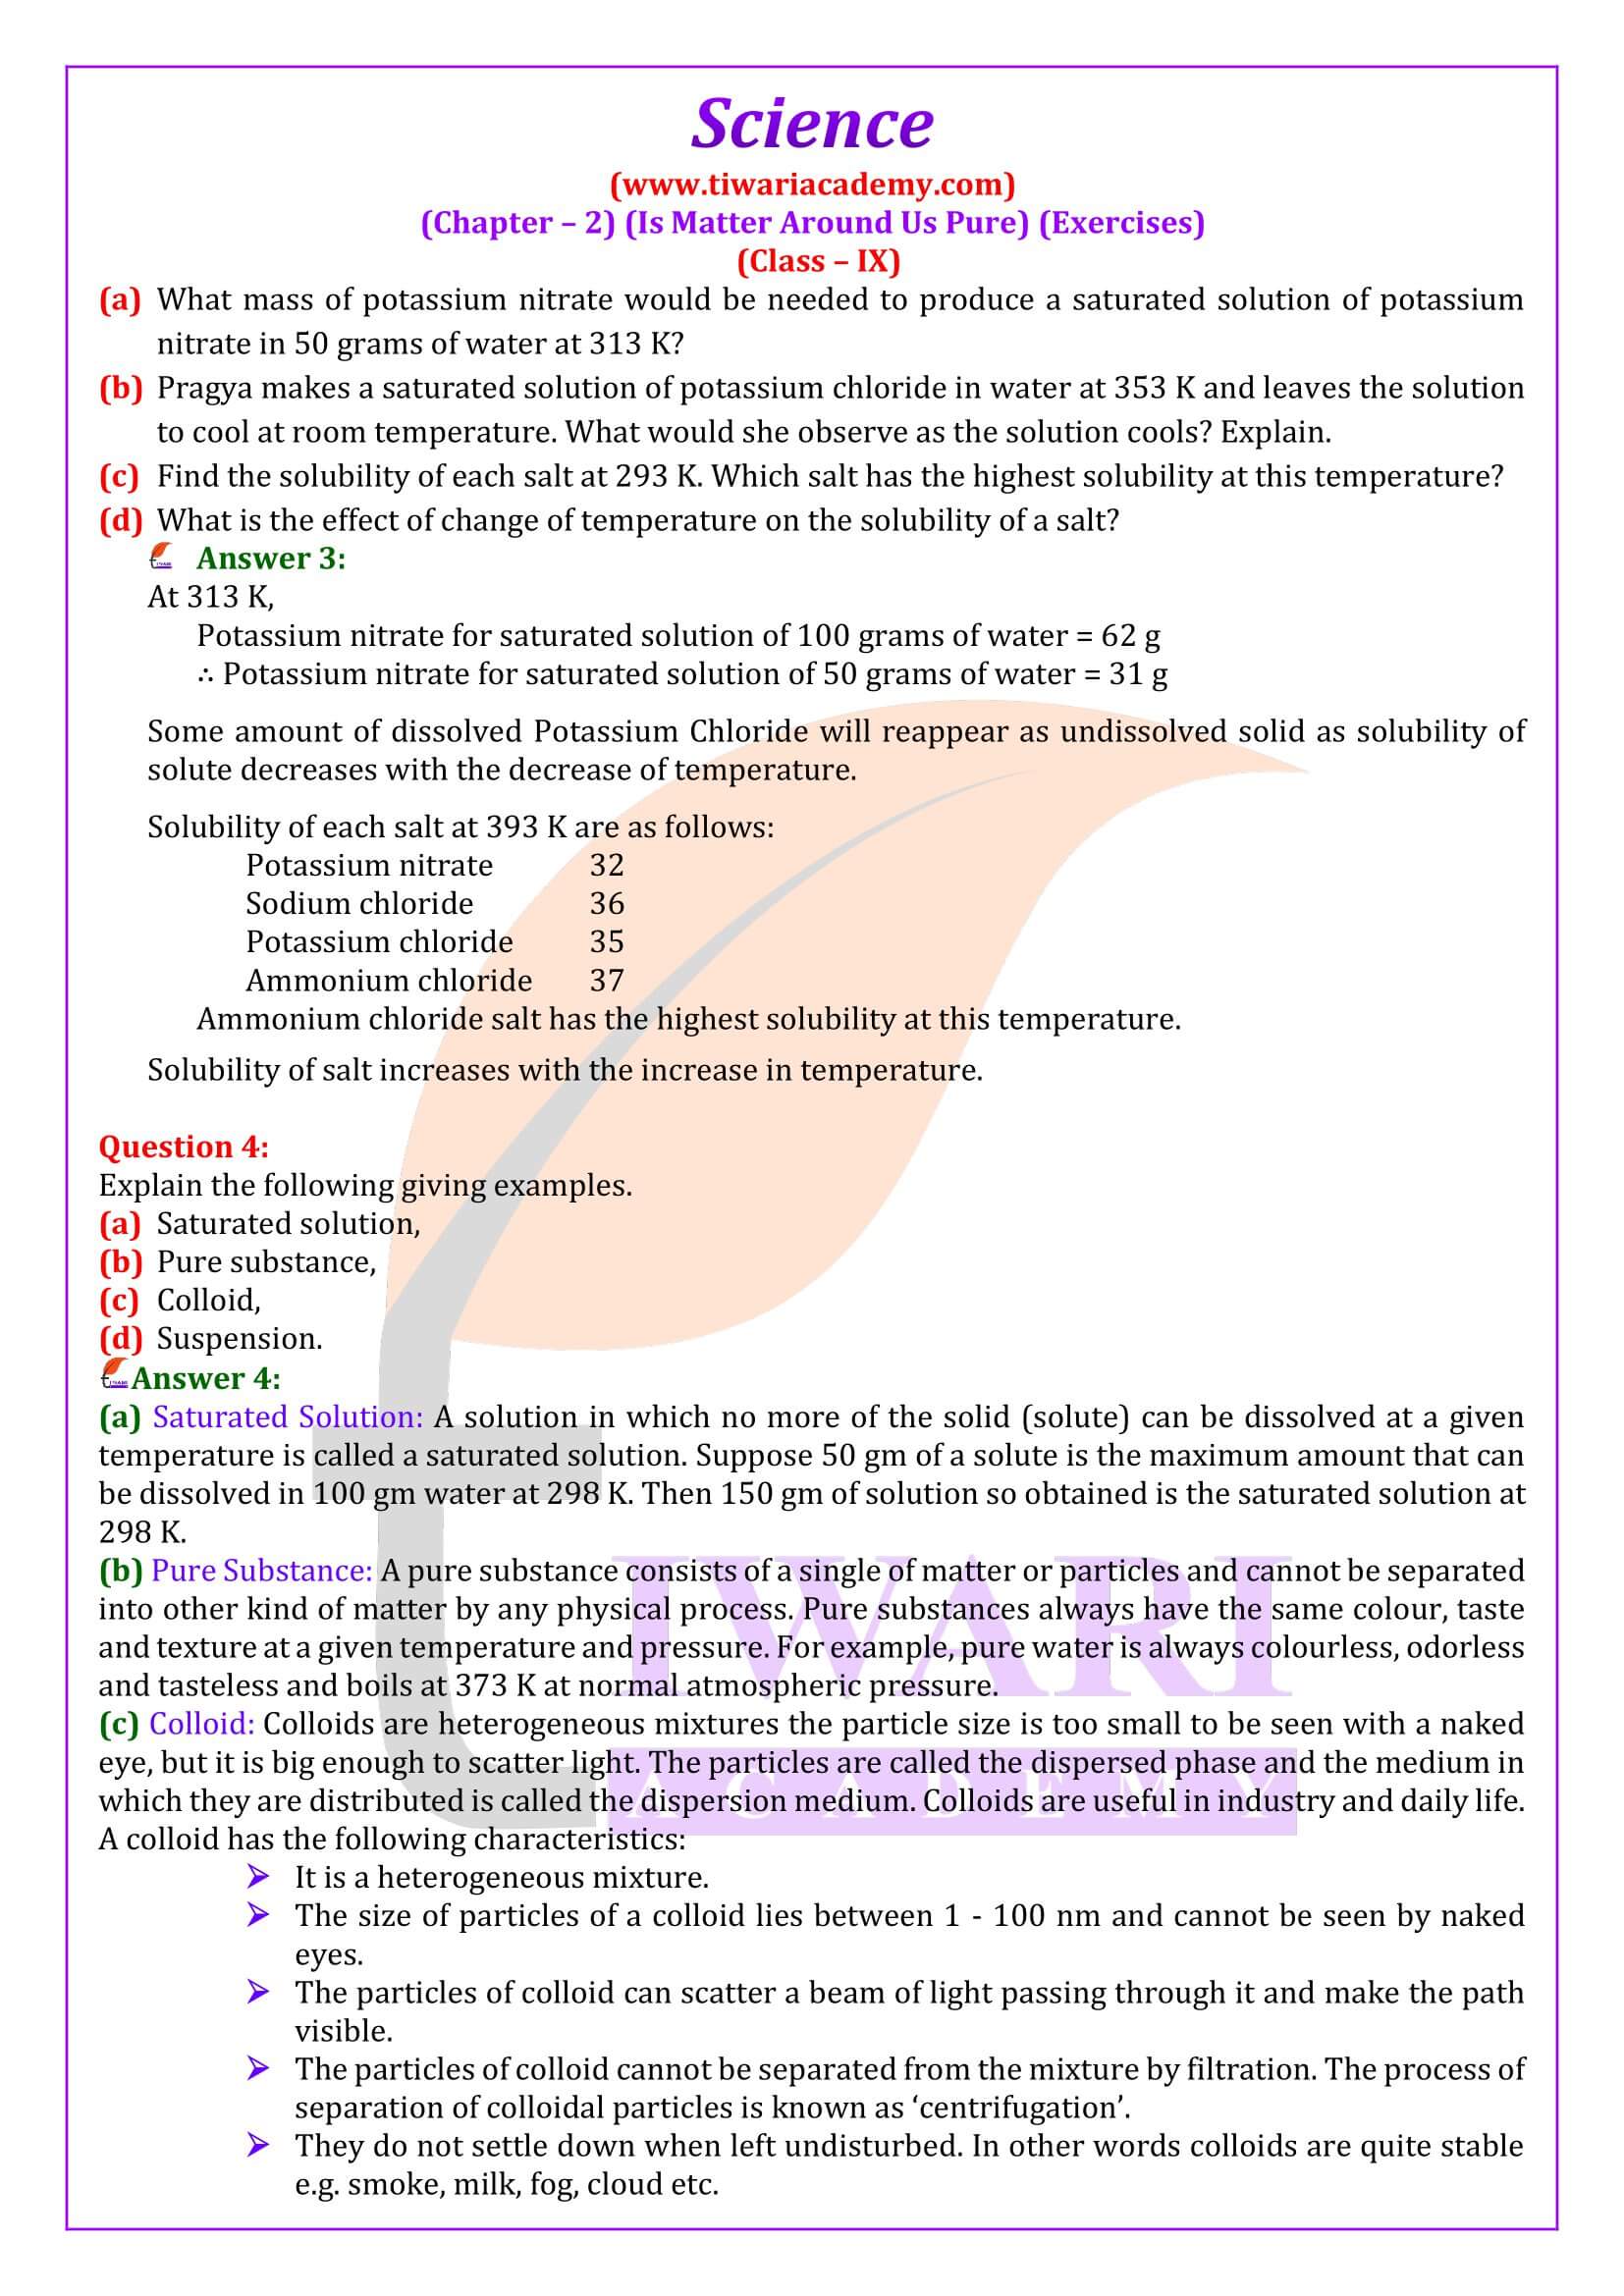 NCERT Solutions for Class 9 Science Chapter 2 Exercises